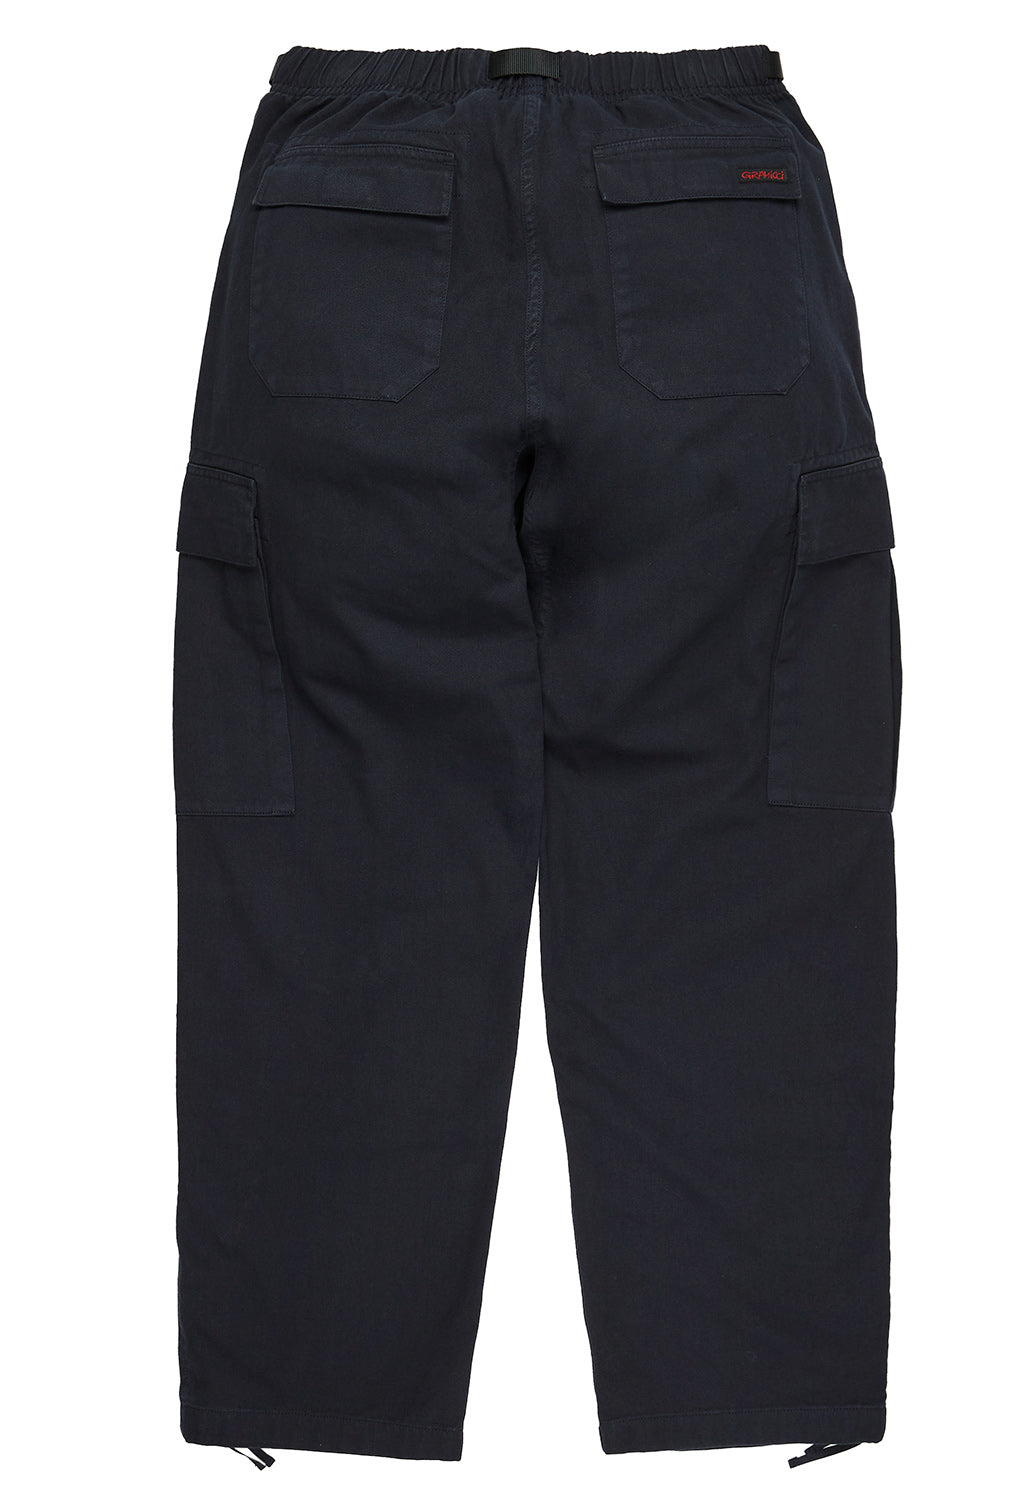 Gramicci Men's Cargo Pants - Double Navy – Outsiders Store UK